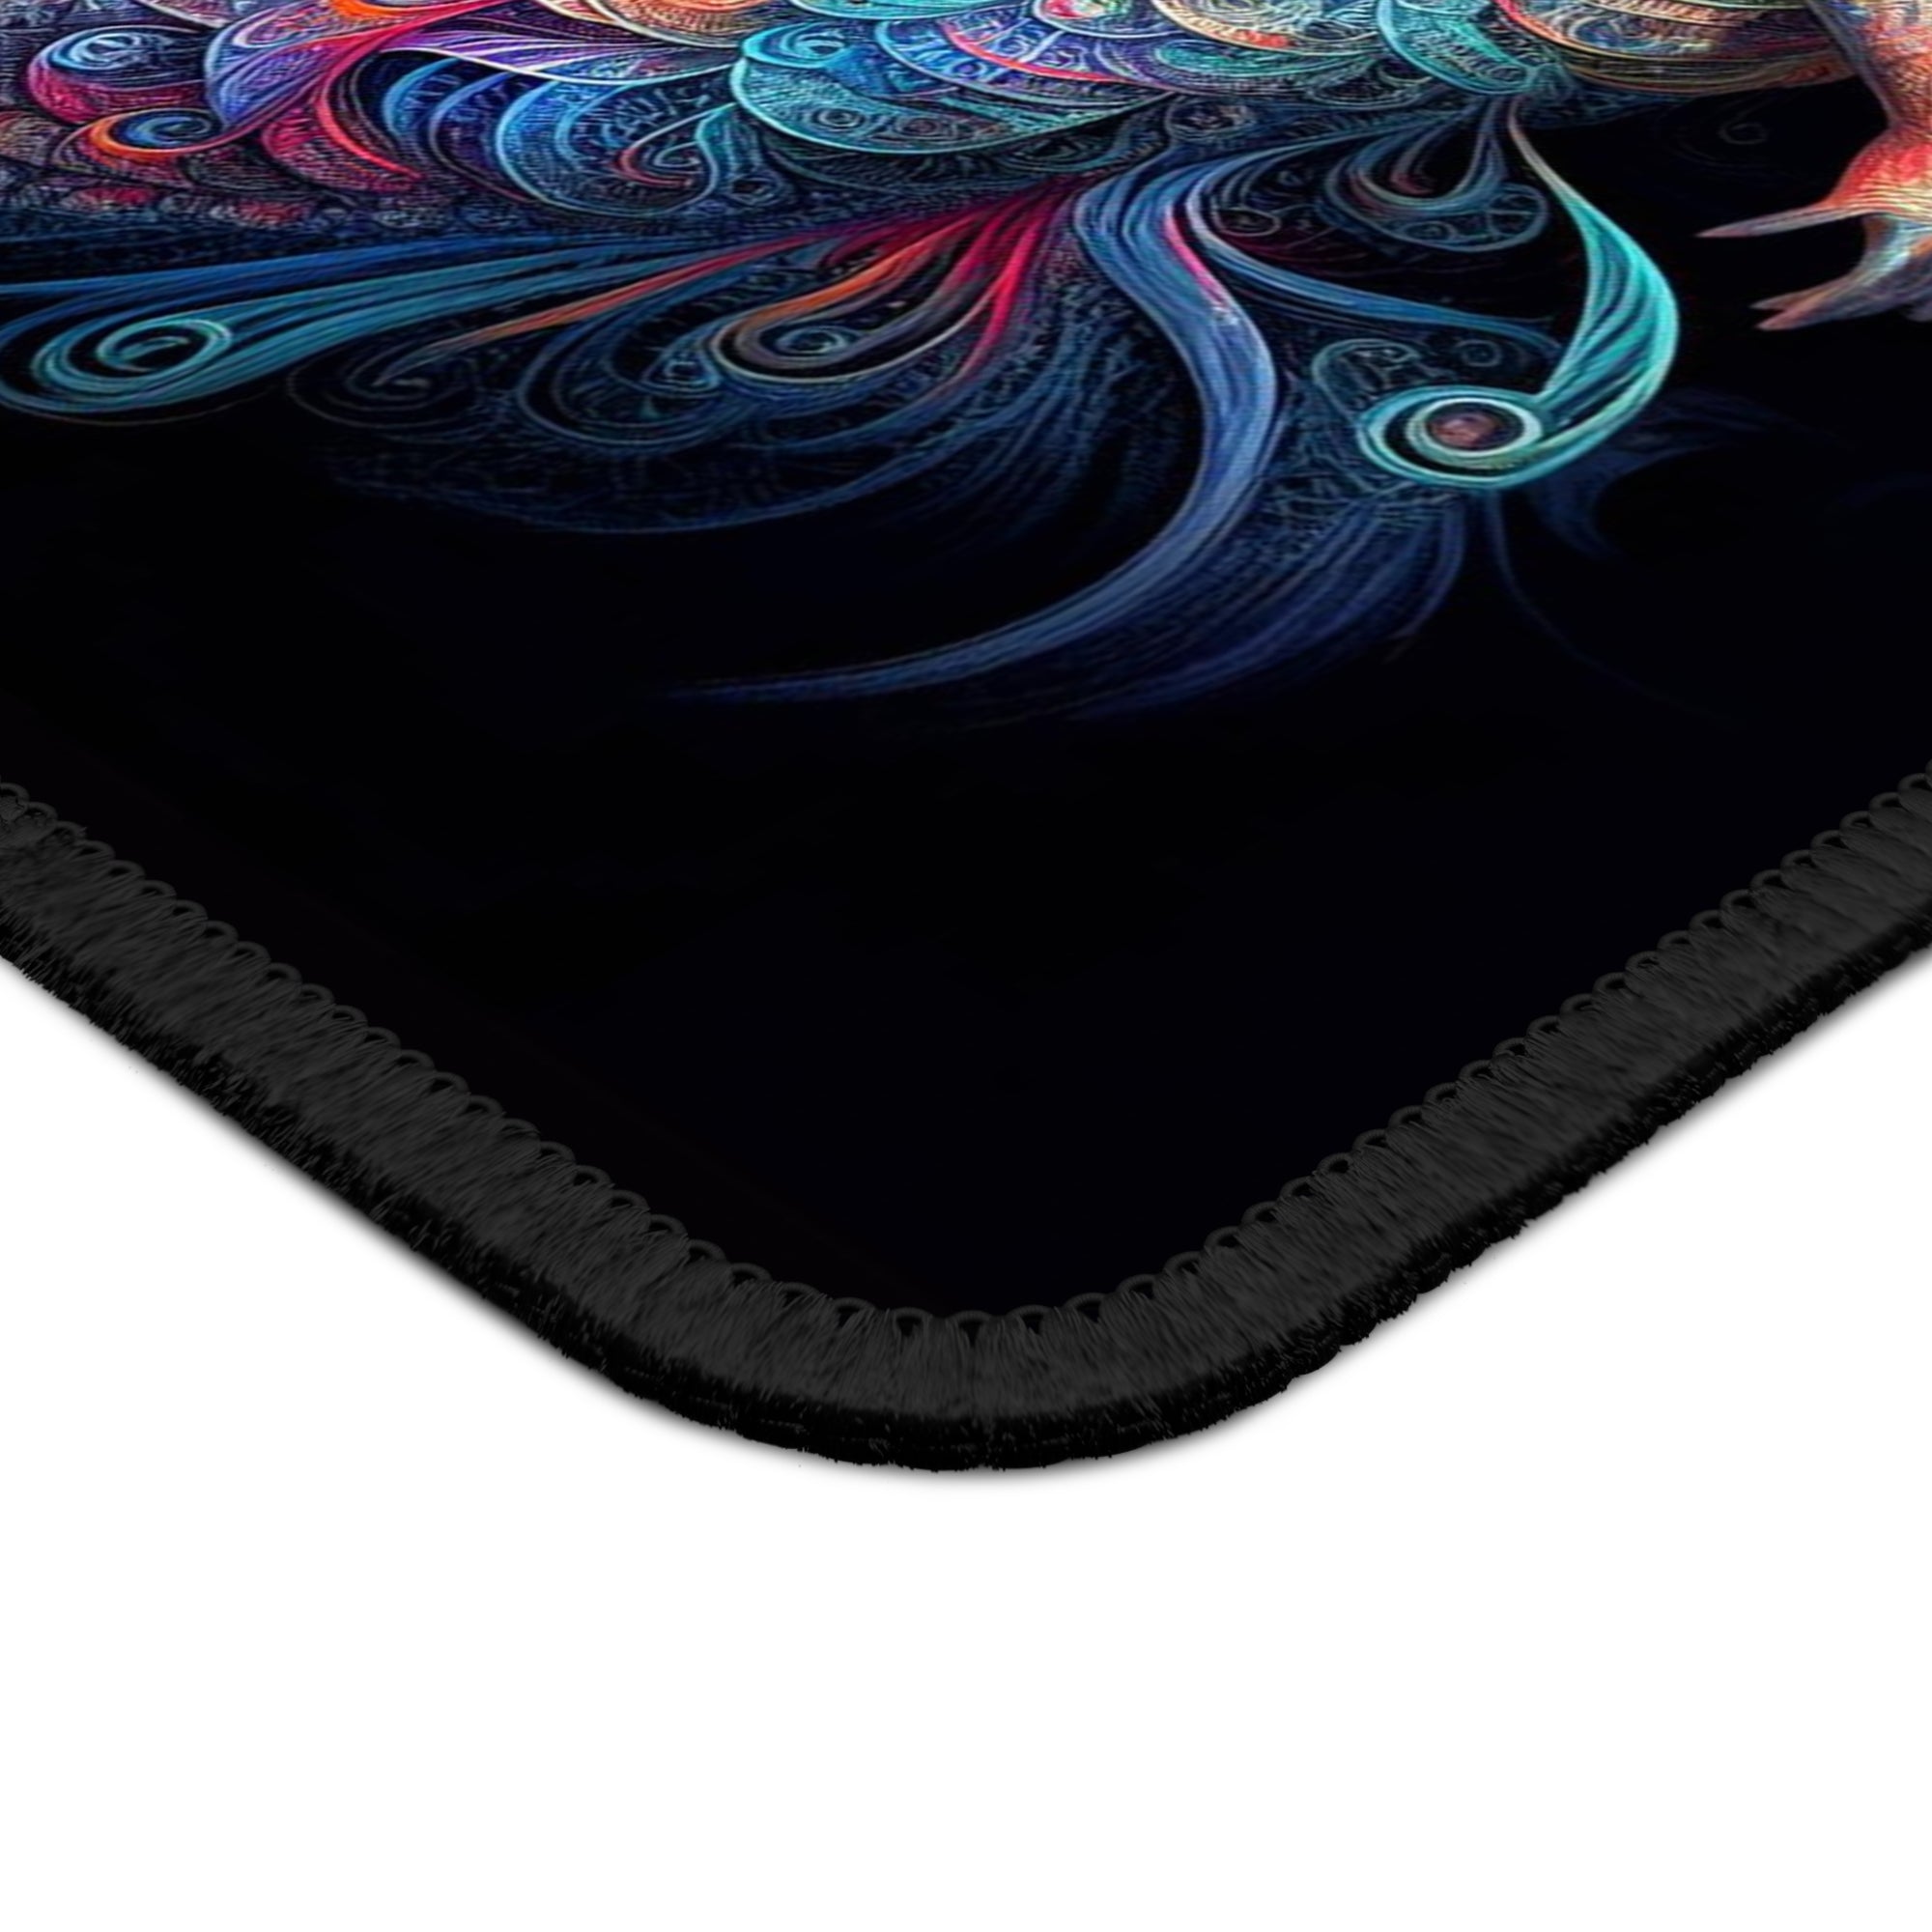 Sirens of Serenity Mouse Pad